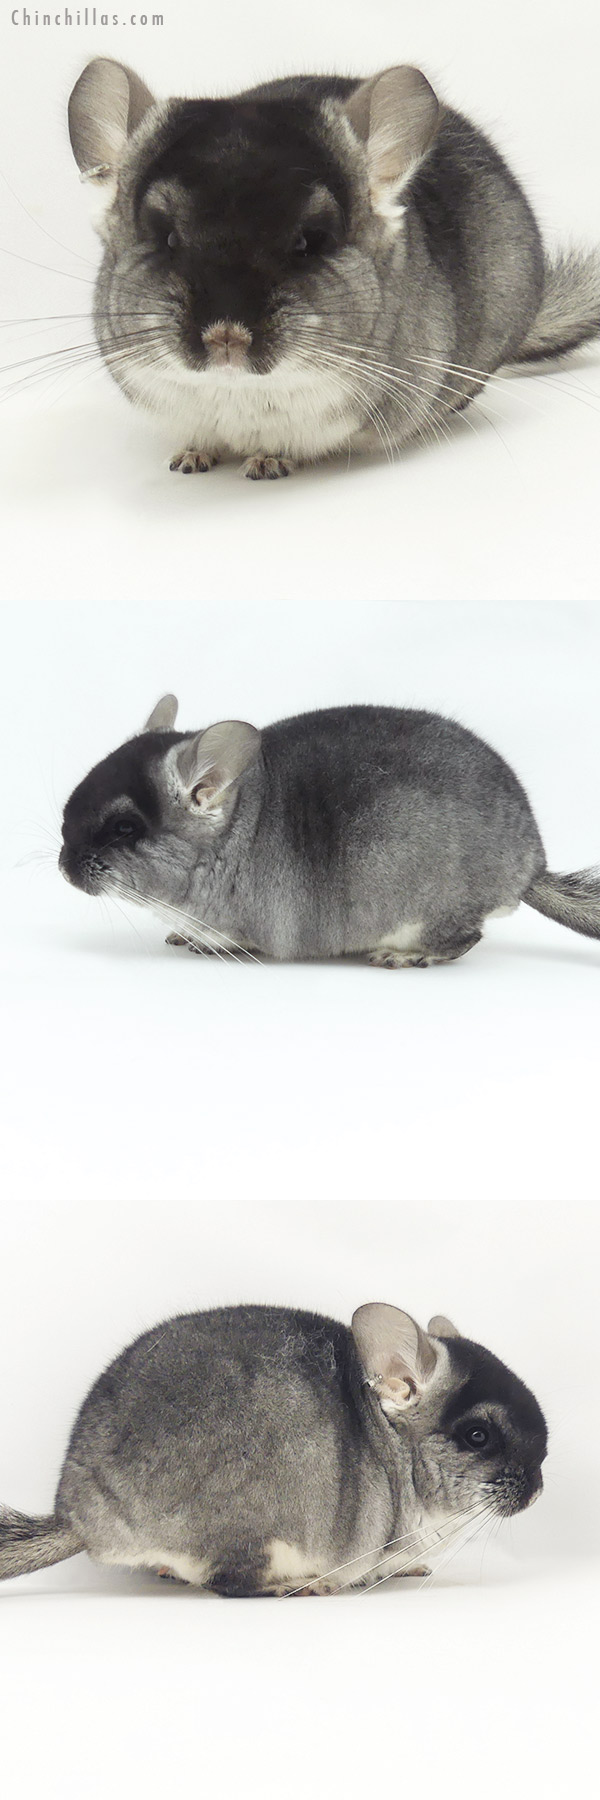 Chinchilla or related item offered for sale or export on Chinchillas.com - 20134 Black Velvet ( Violet & Royal Persian Angora Carrier ) Male Chinchilla